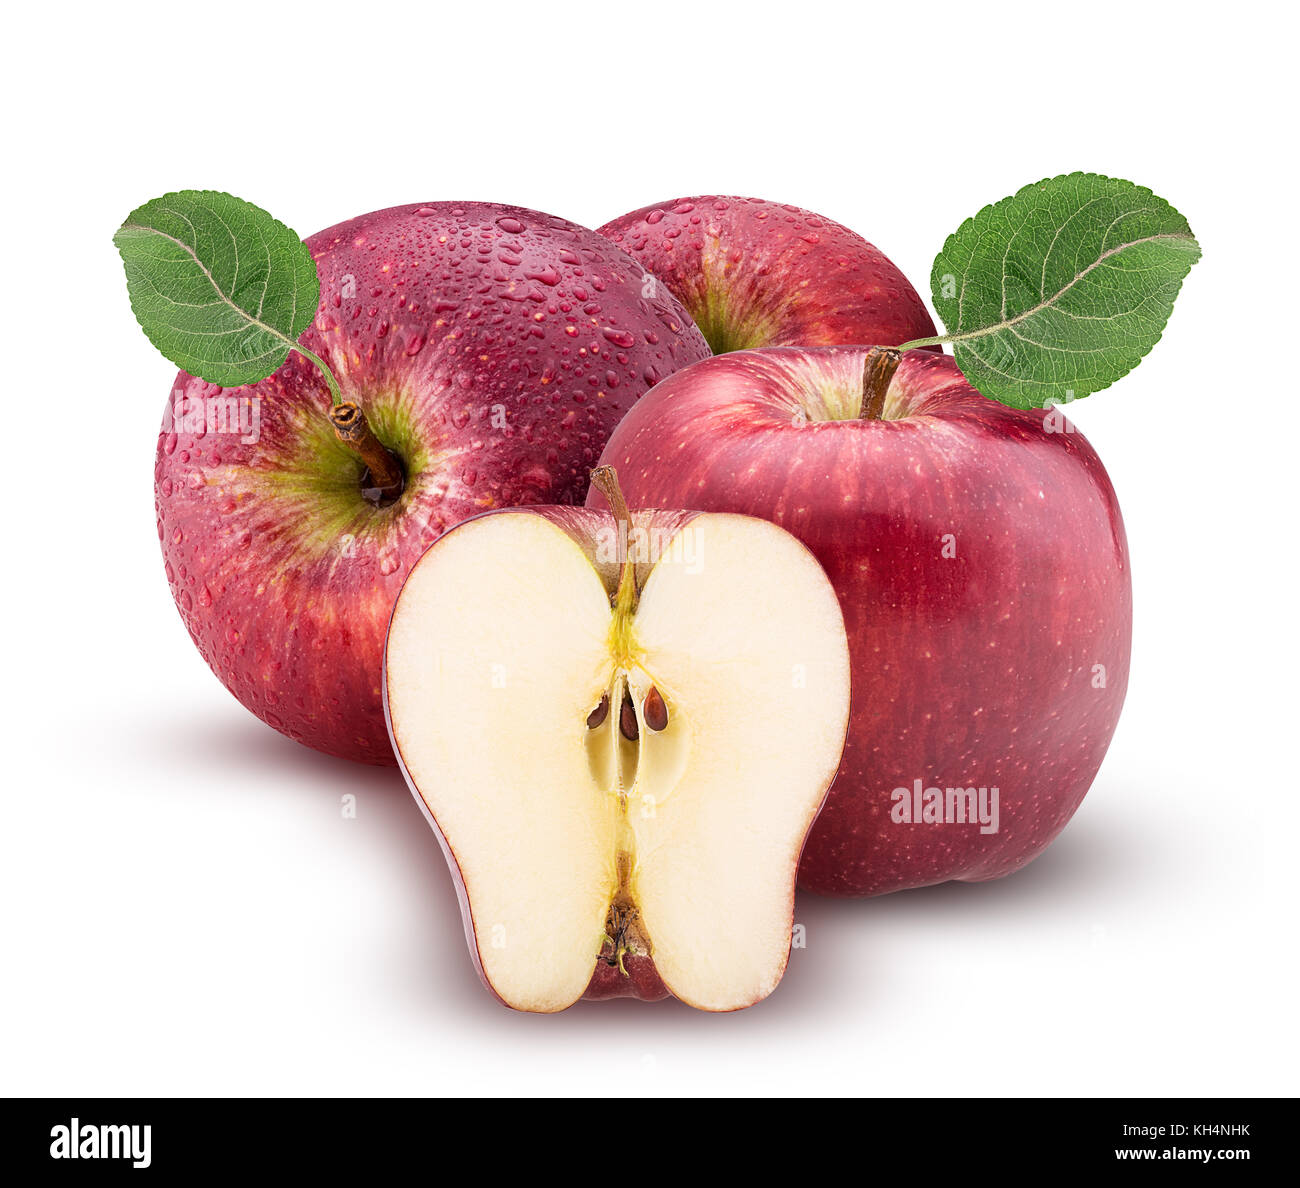 https://c8.alamy.com/comp/KH4NHK/red-and-green-apples-one-cut-in-half-with-leaf-with-water-drops-isolated-KH4NHK.jpg